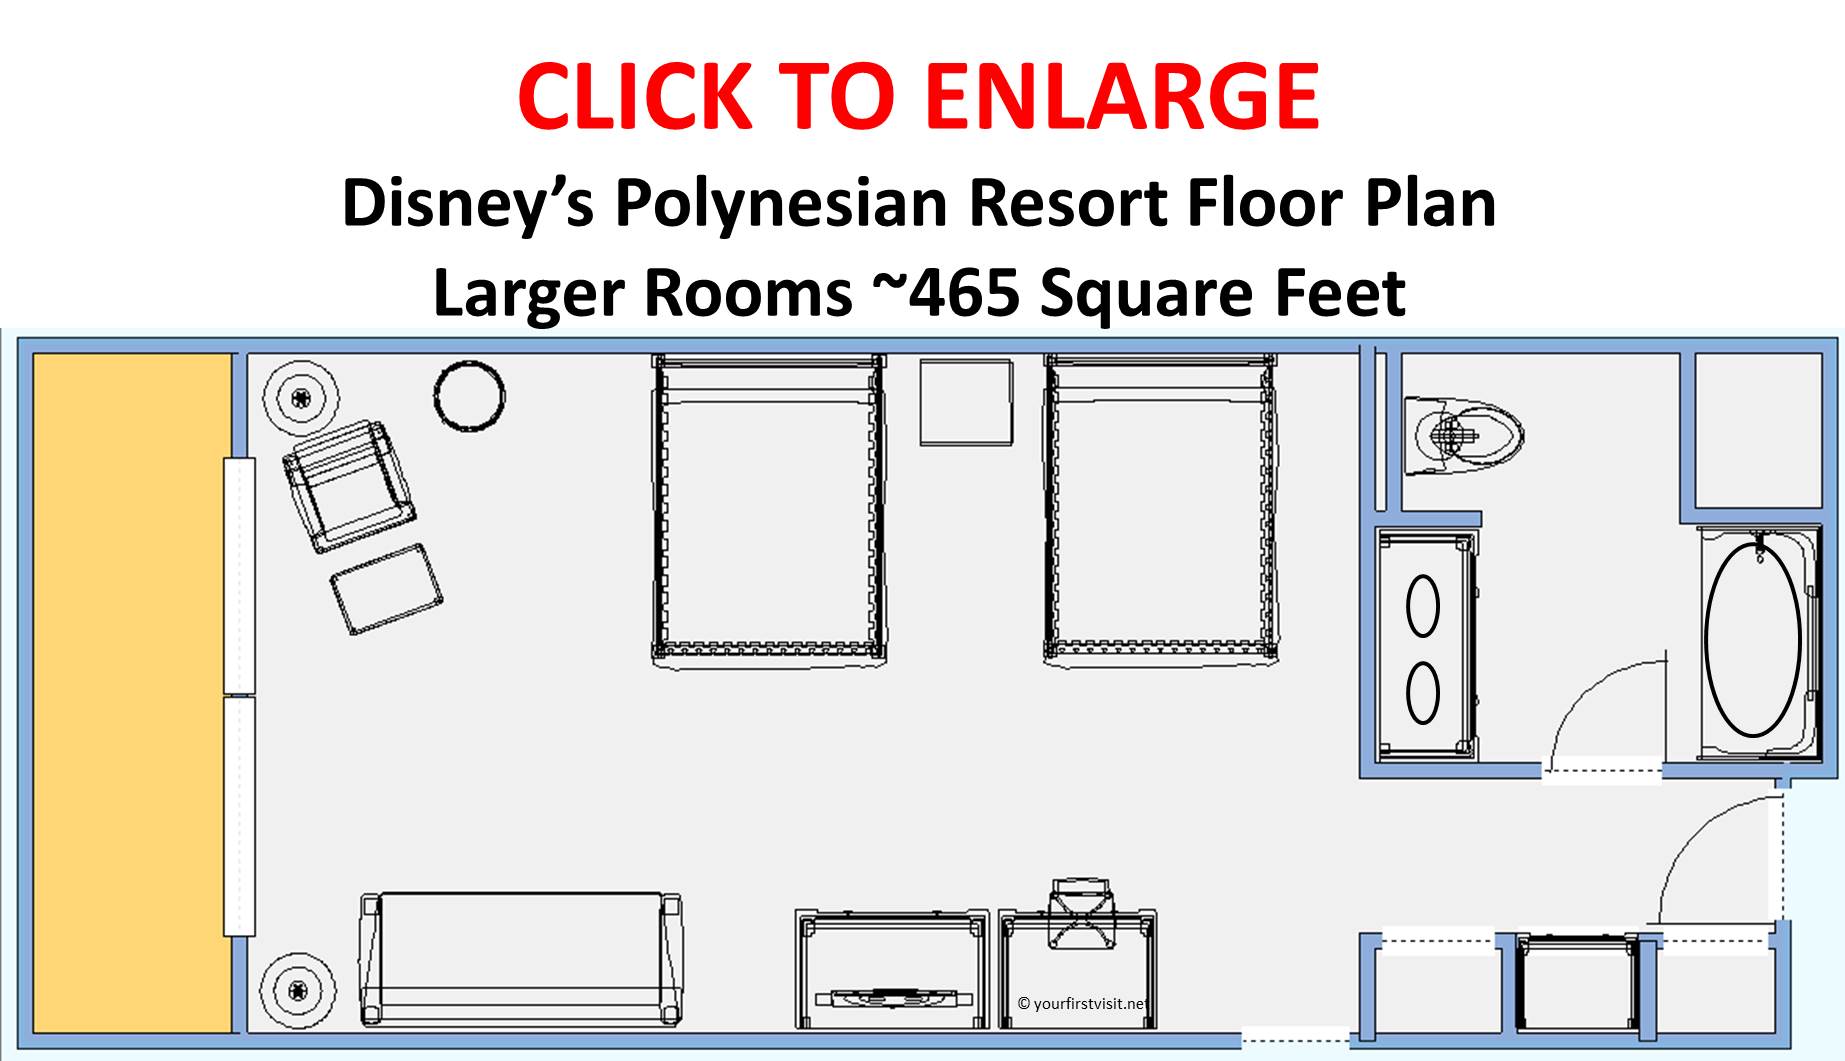 Photo Tour of a Larger Refurbished Room at Disney's